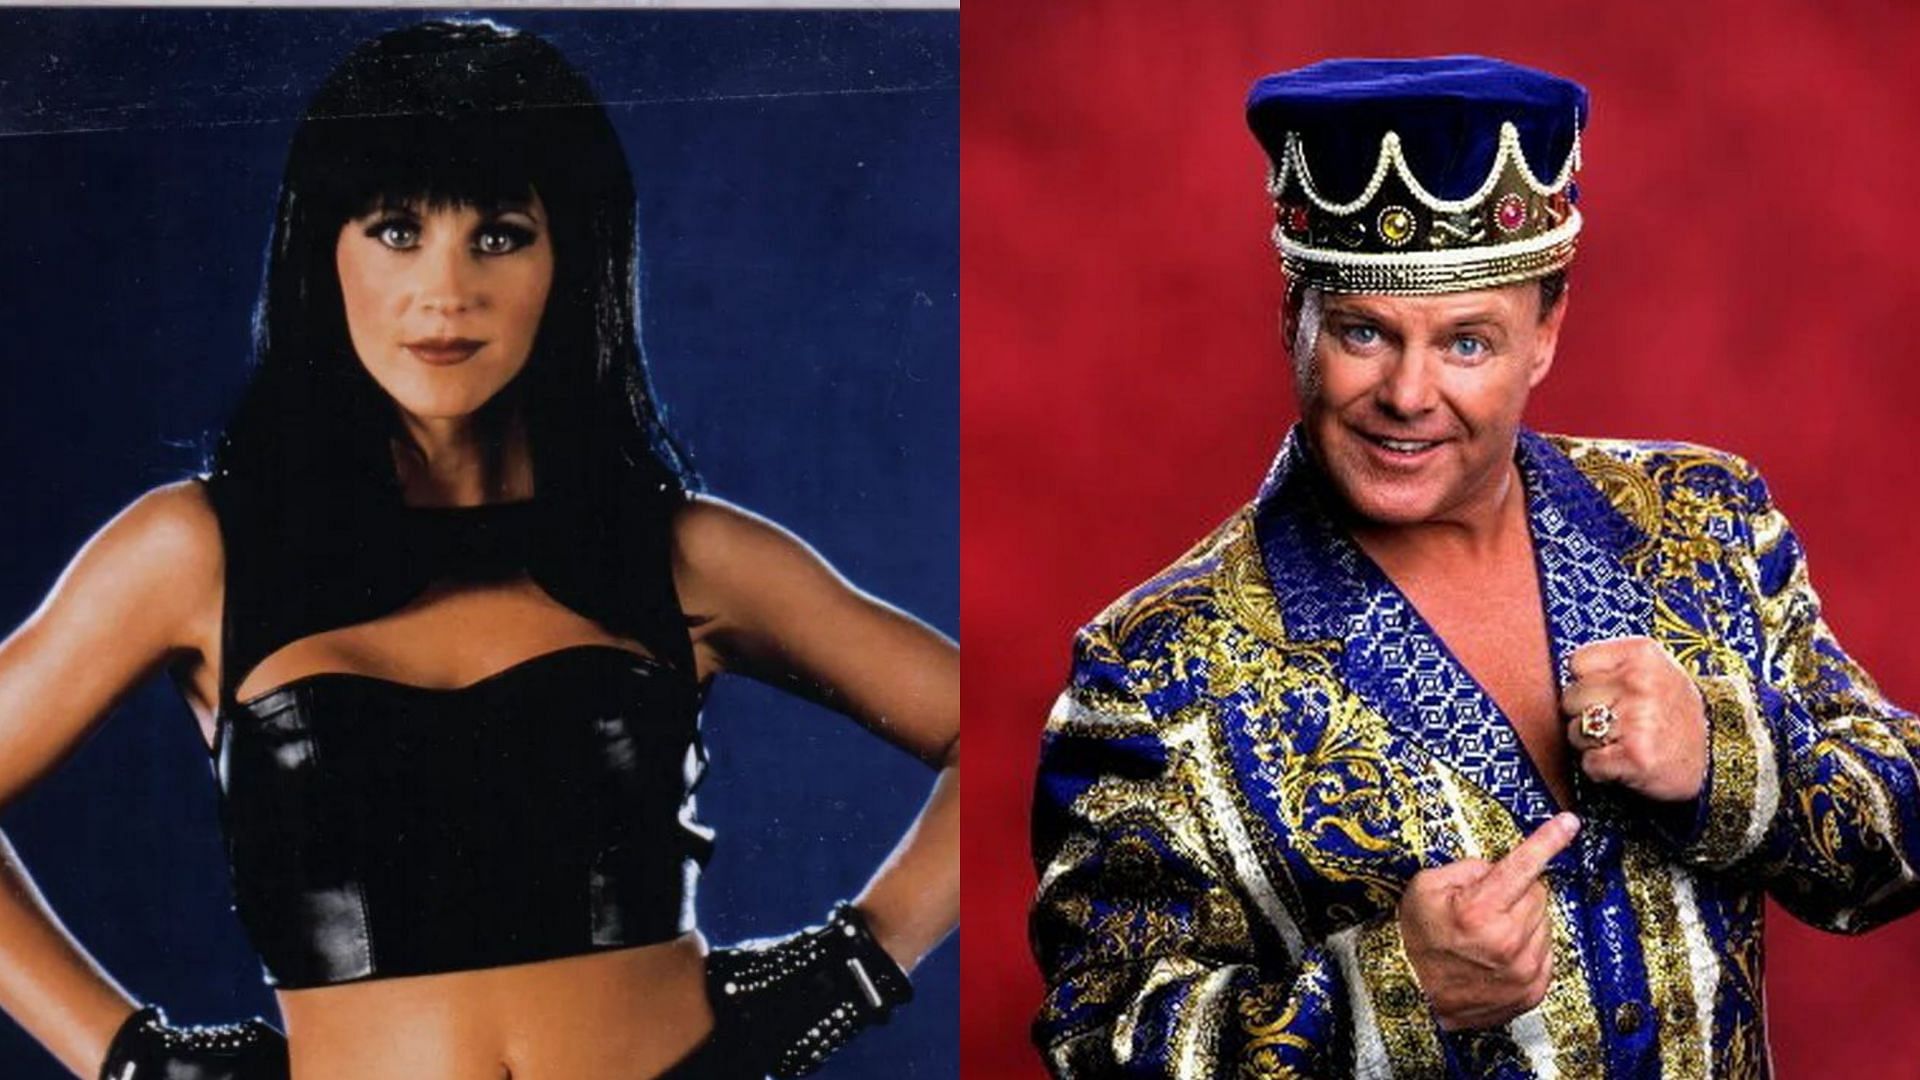 Stacy Carter (left) and Jerry Lawler (right)